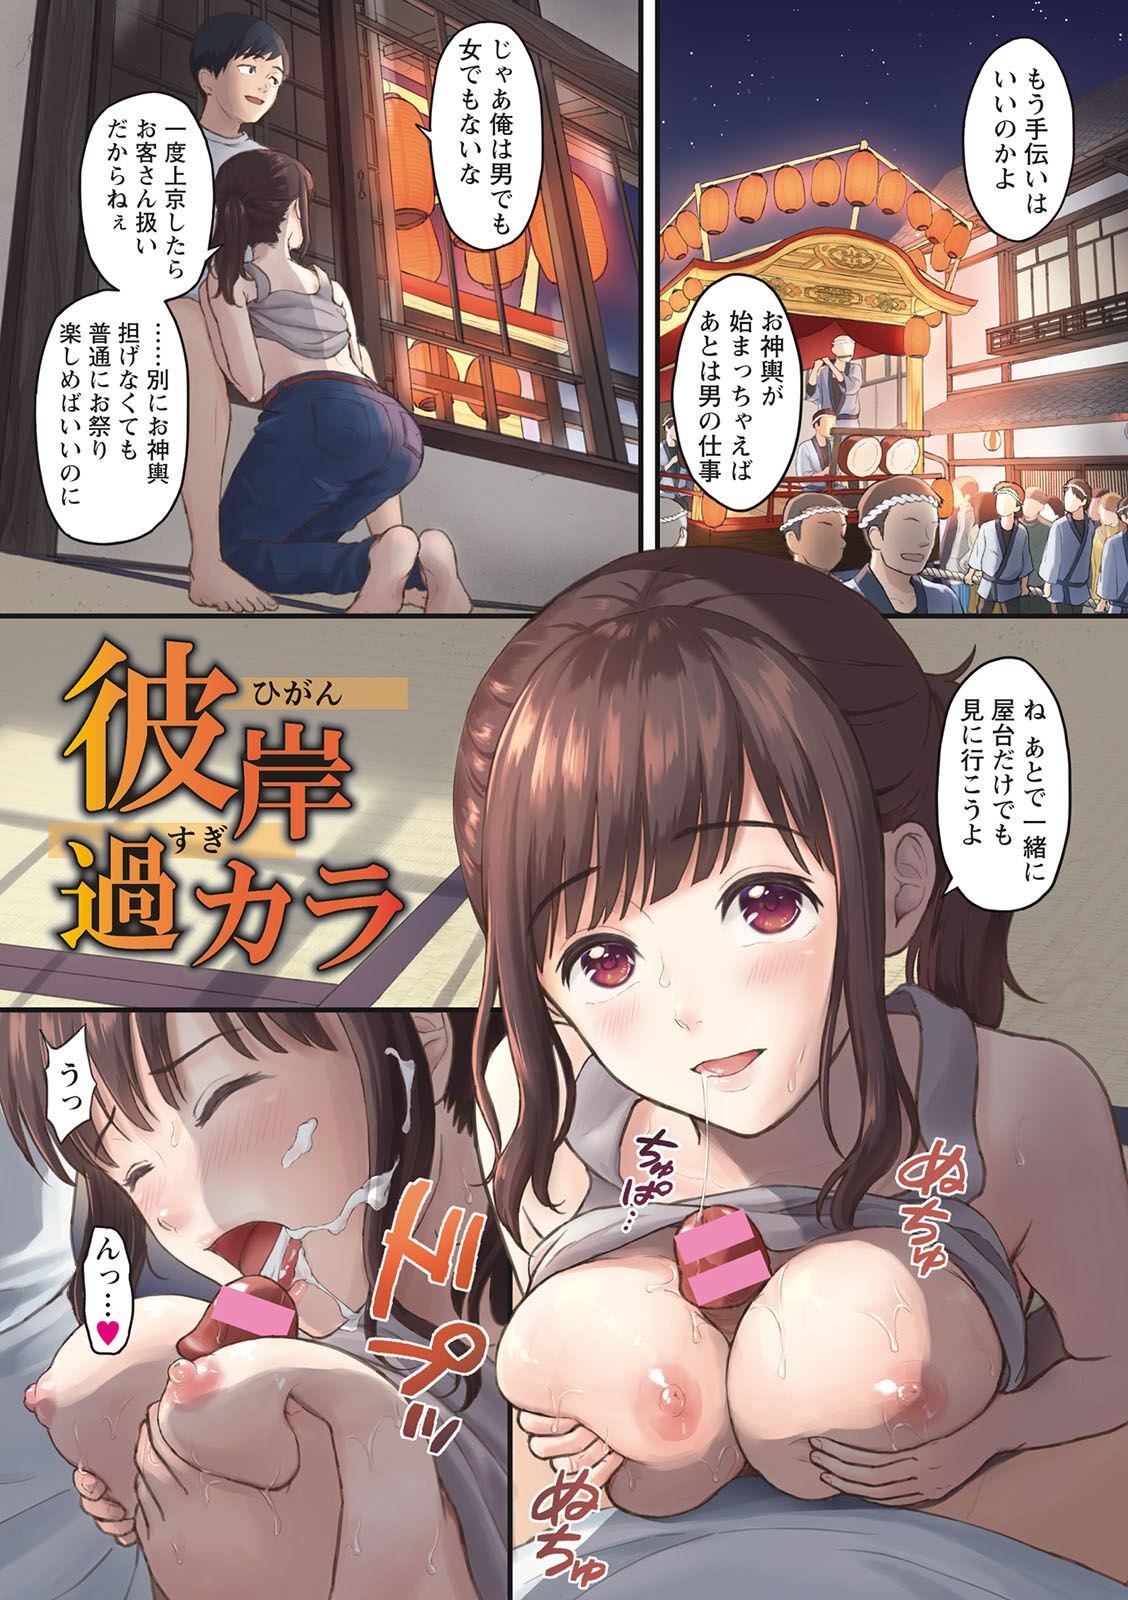 Perfect Porn Ameagari ni Mou Ichido - Once again after the rain Submission - Page 3